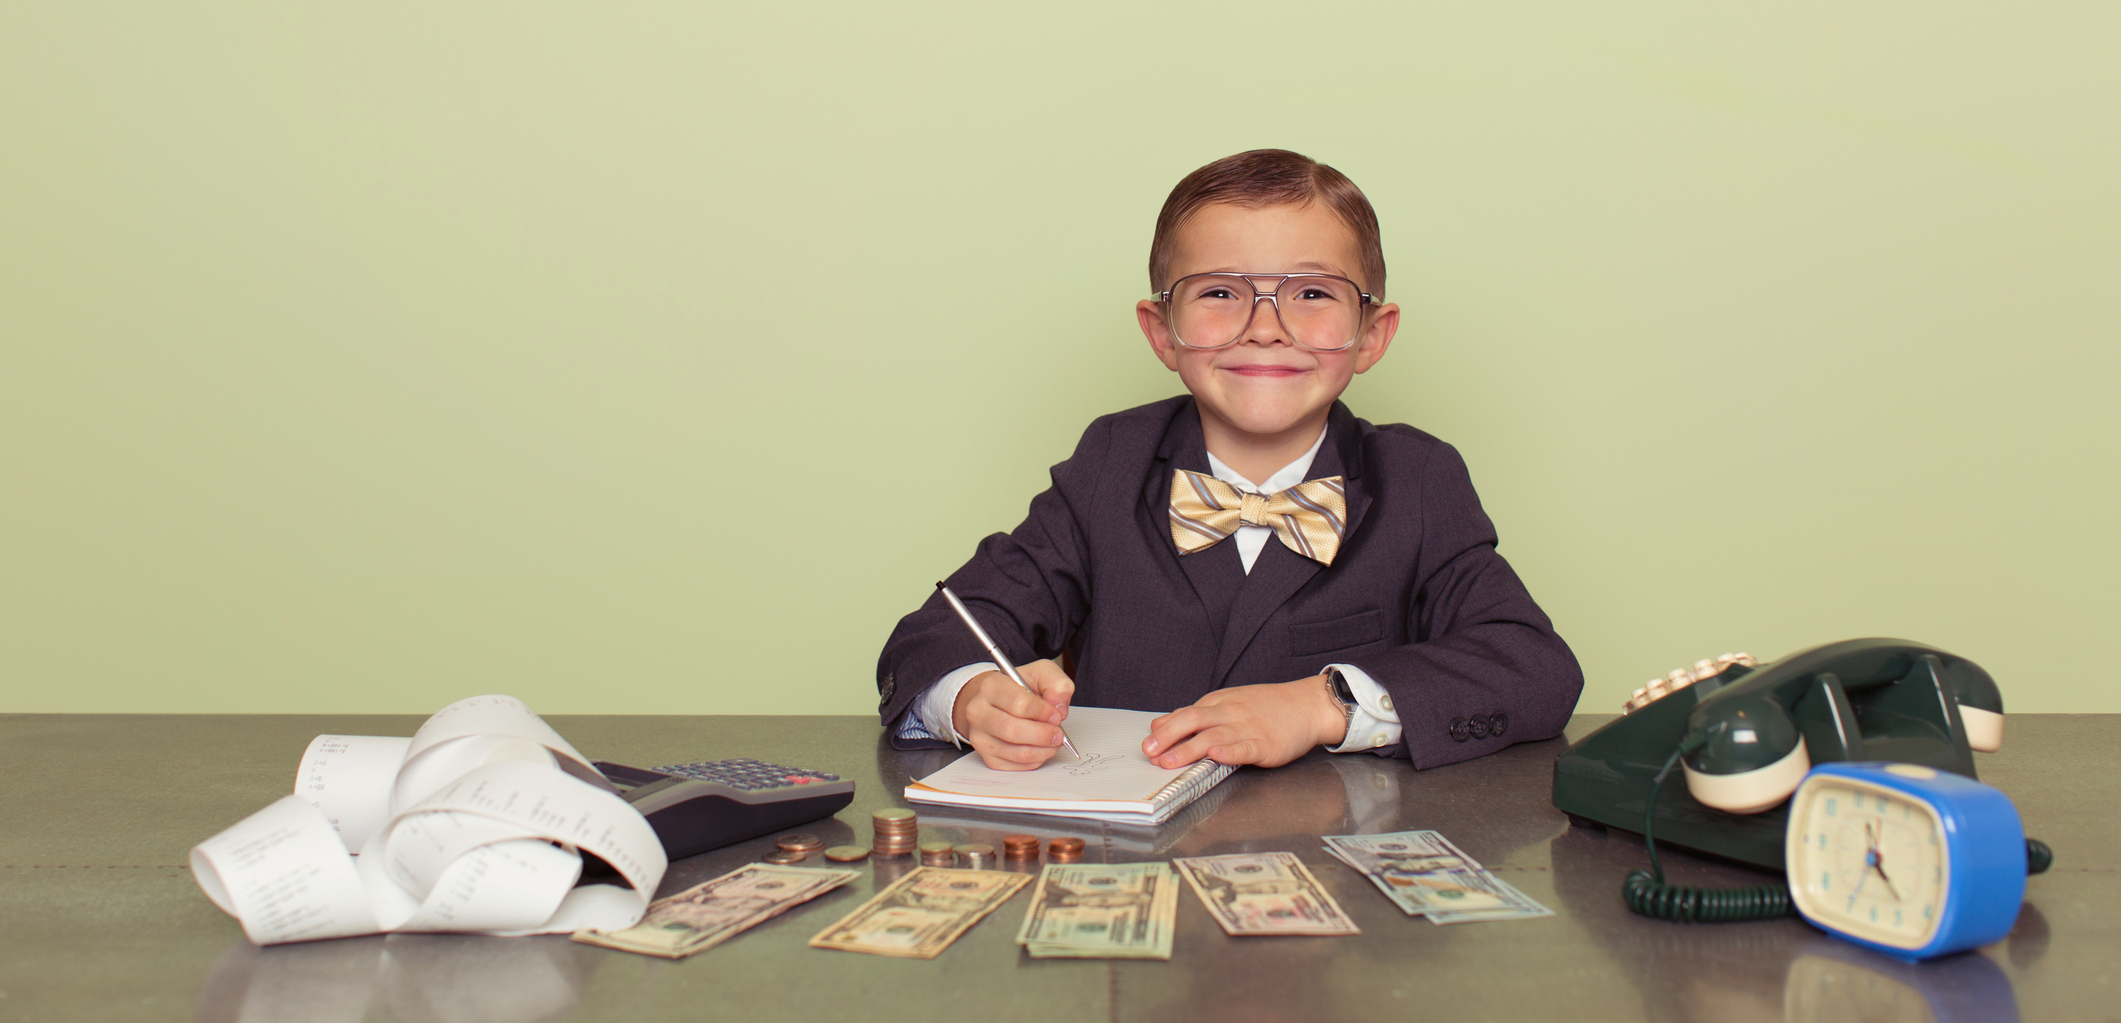 Content Marketing Salary: Young Boy Counting money